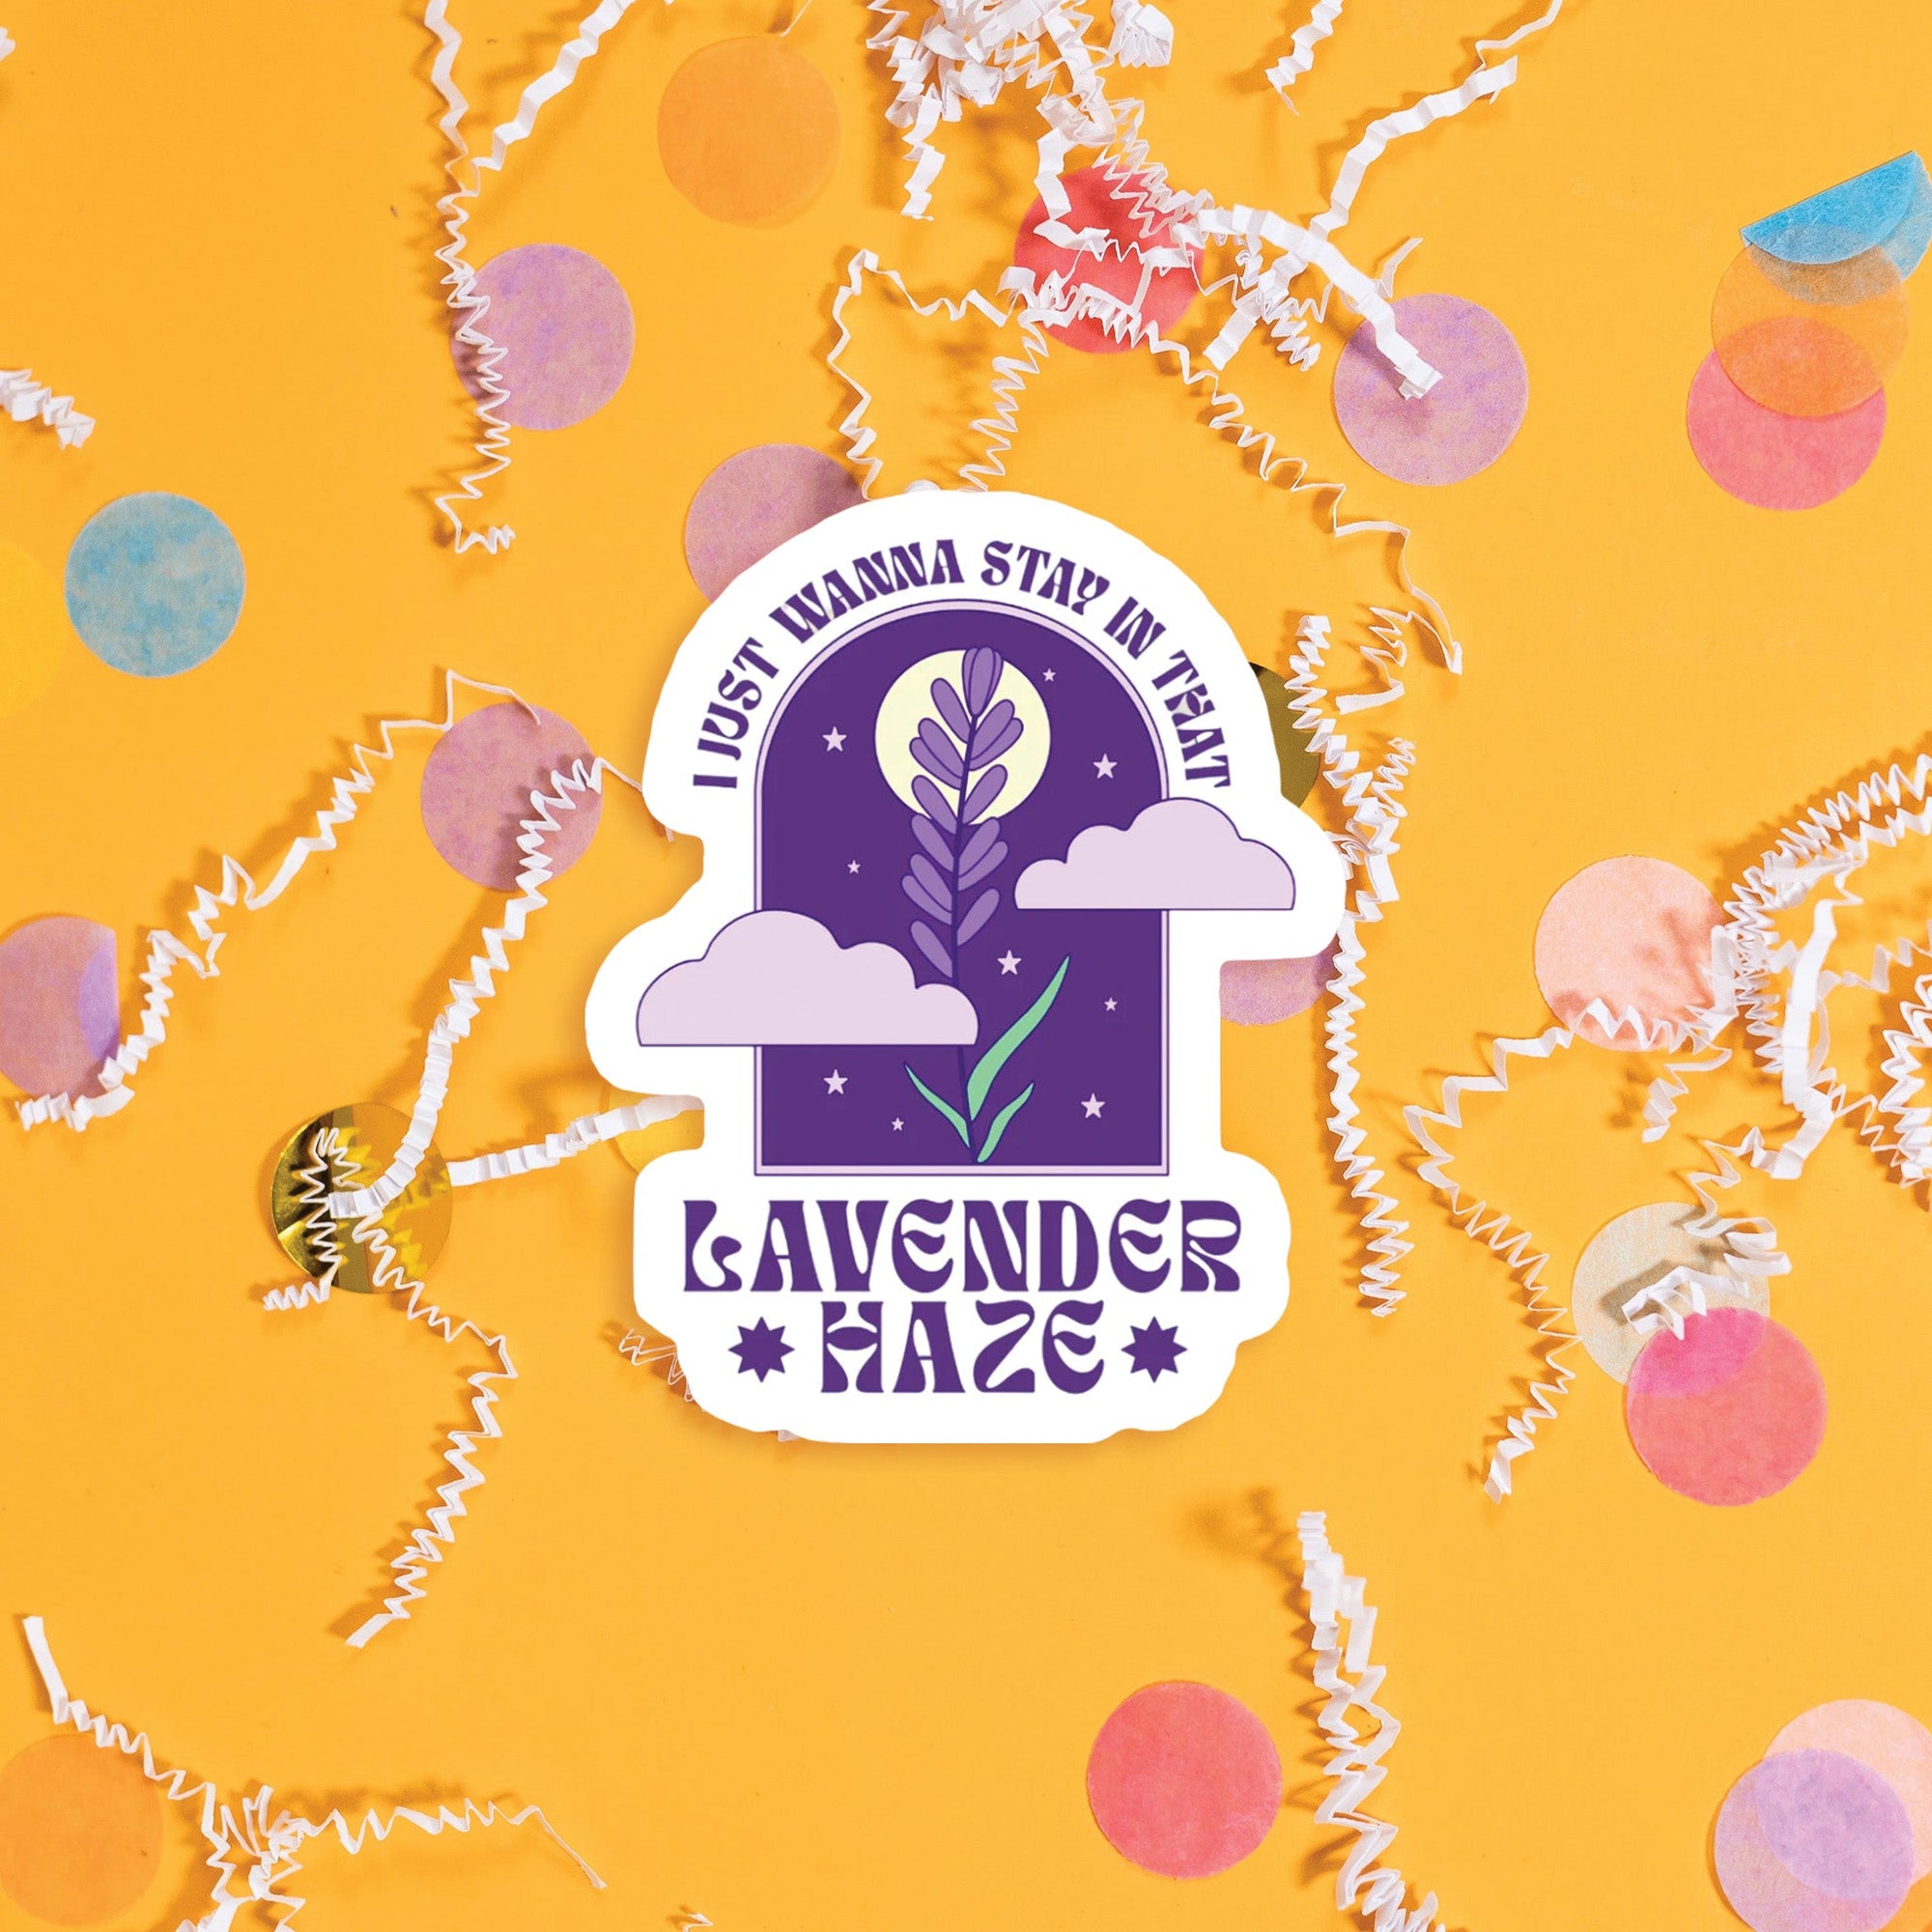 On a sunny mustard background sits a sticker with colorful confetti and white crinkle scattered around. This vintage sticker has an illustration of a purple lavender with a moon, stars and lavender clouds. At the top it says "I JUST WANNA STAY IN THAT" and the bottom it says "LAVENDER *HAZE*." It is in a purple, all caps funky lettering. Approximately 3".